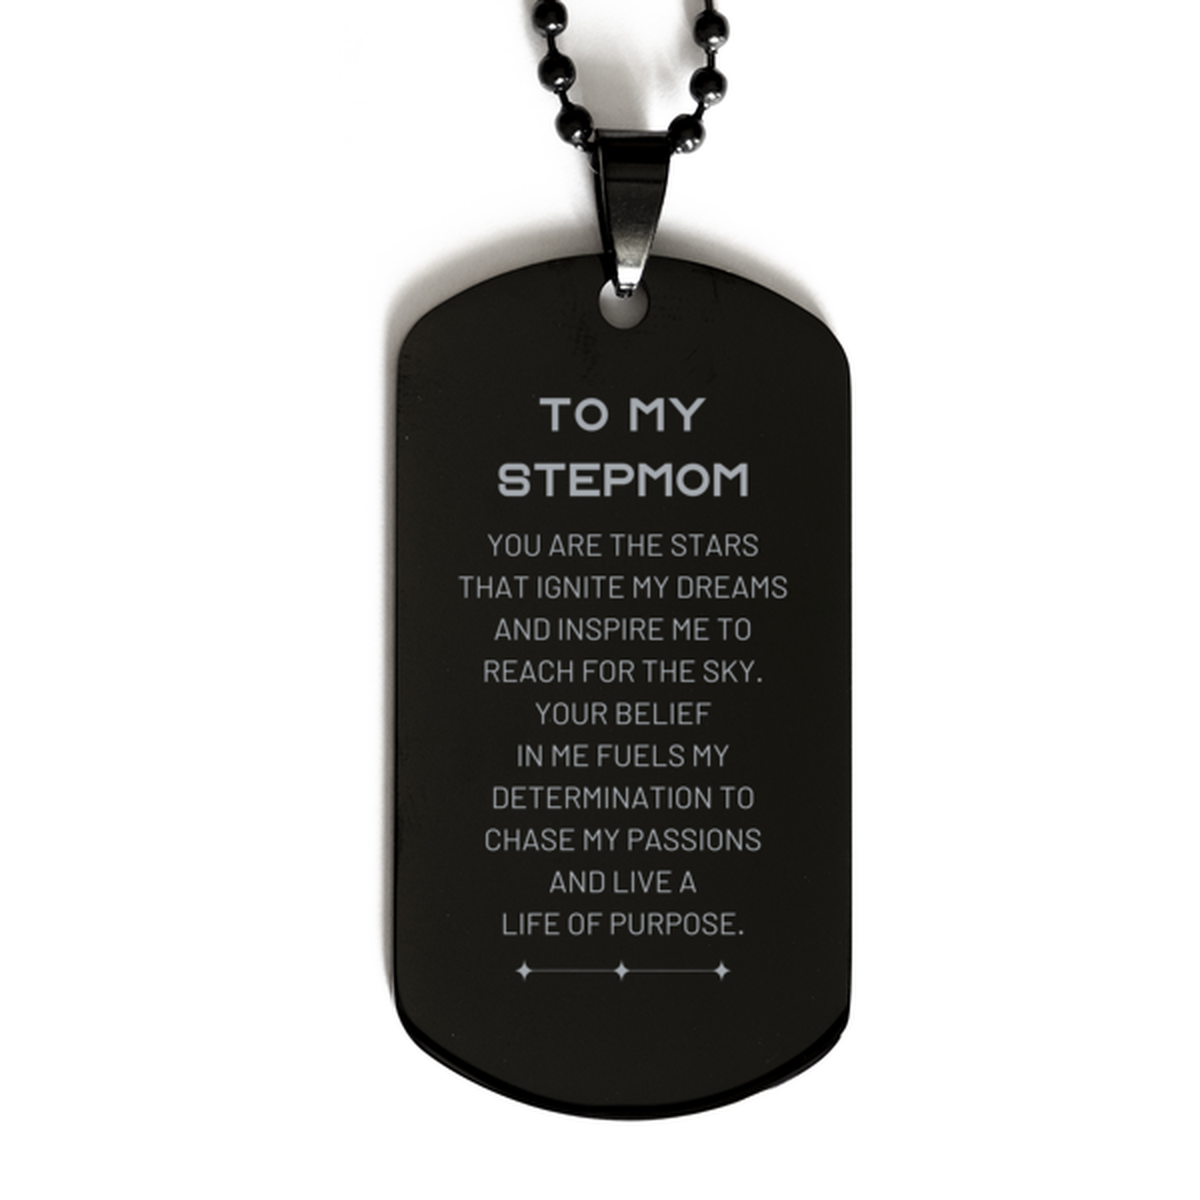 To My Stepmom Black Dog Tag, You are the stars that ignite my dreams and inspire me to reach for the sky, Birthday Unique Gifts For Stepmom, Thank You Gifts For Stepmom